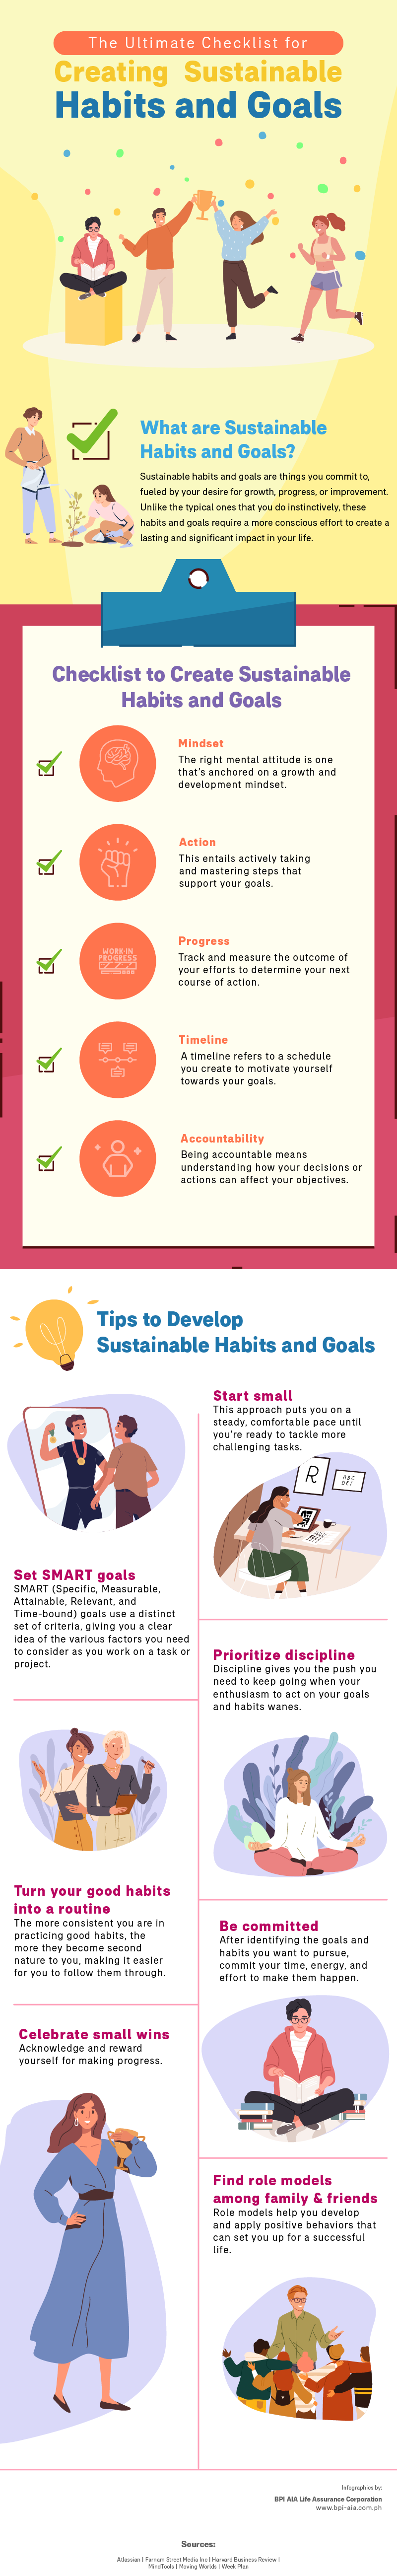 The Ultimate Checklist for Creating Sustainable Habits and Goals